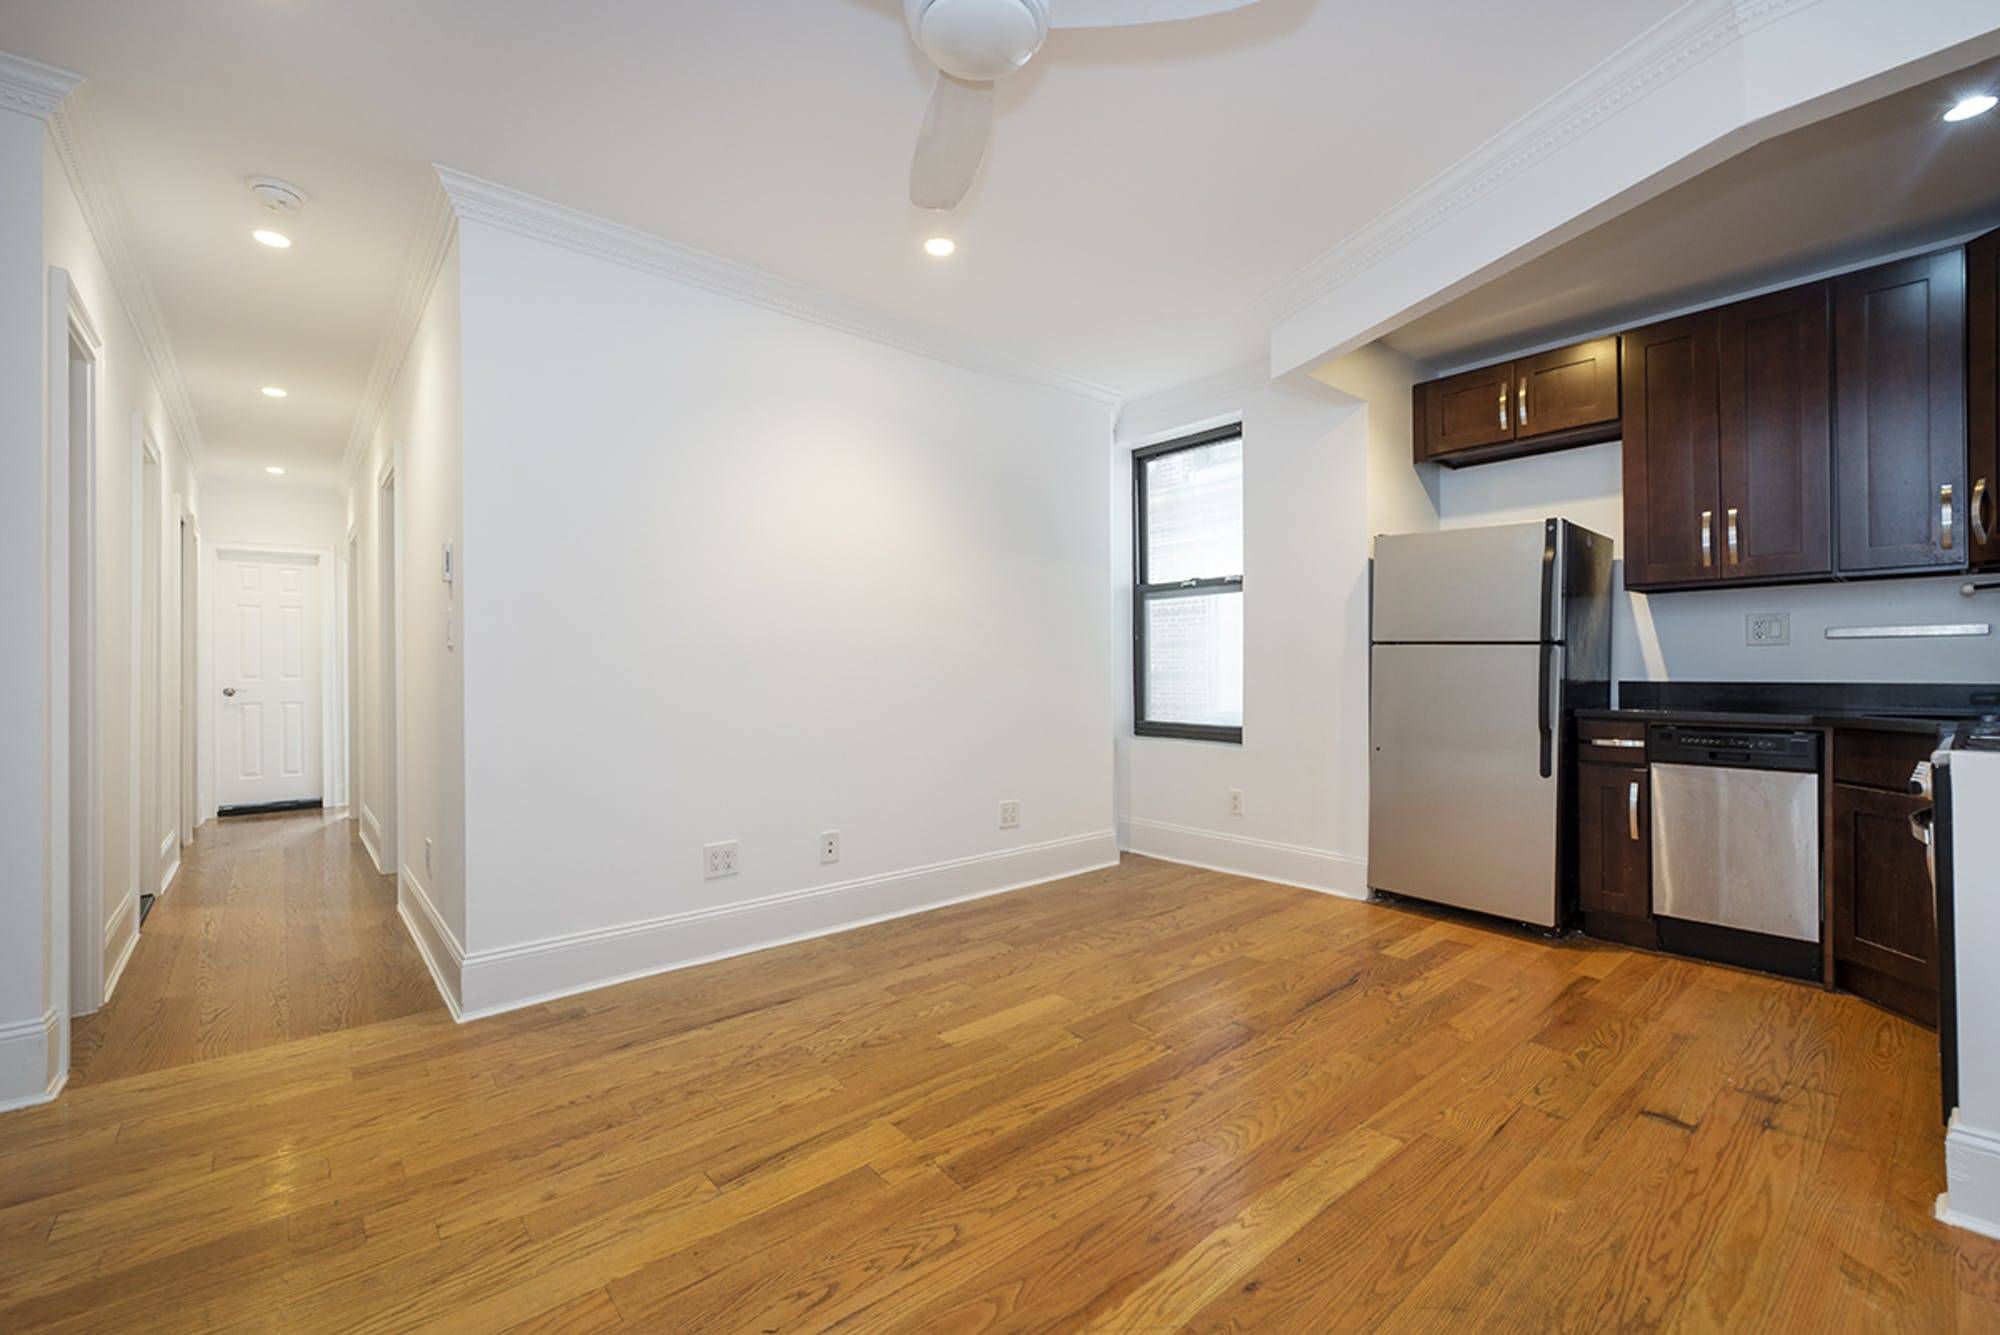 1 Month Free 3392 net, 3700 gross Welcome to 1059 Union Street 1059 Union Street is a collective of renovated apartments, pridefully overlooking Prospect Park in prime Crown Heights.